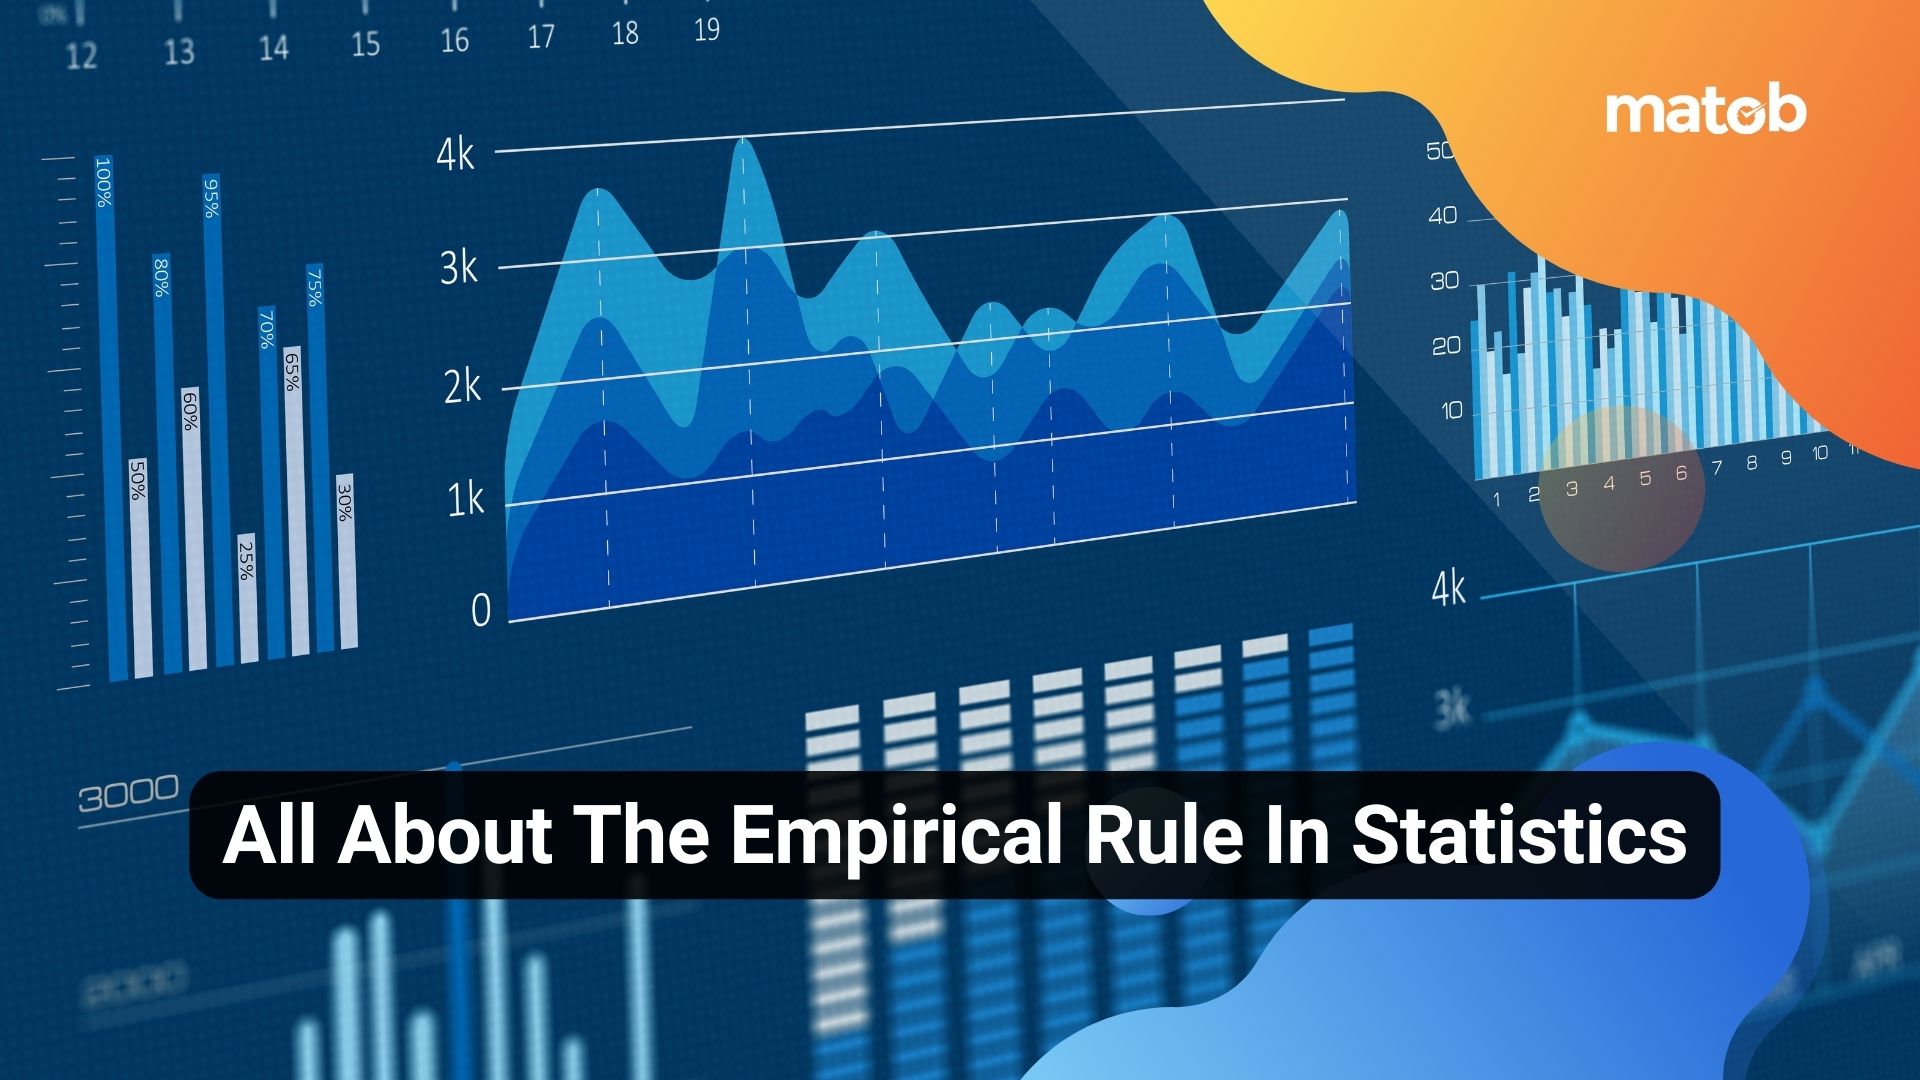 All About The Empirical Rule In Statistics